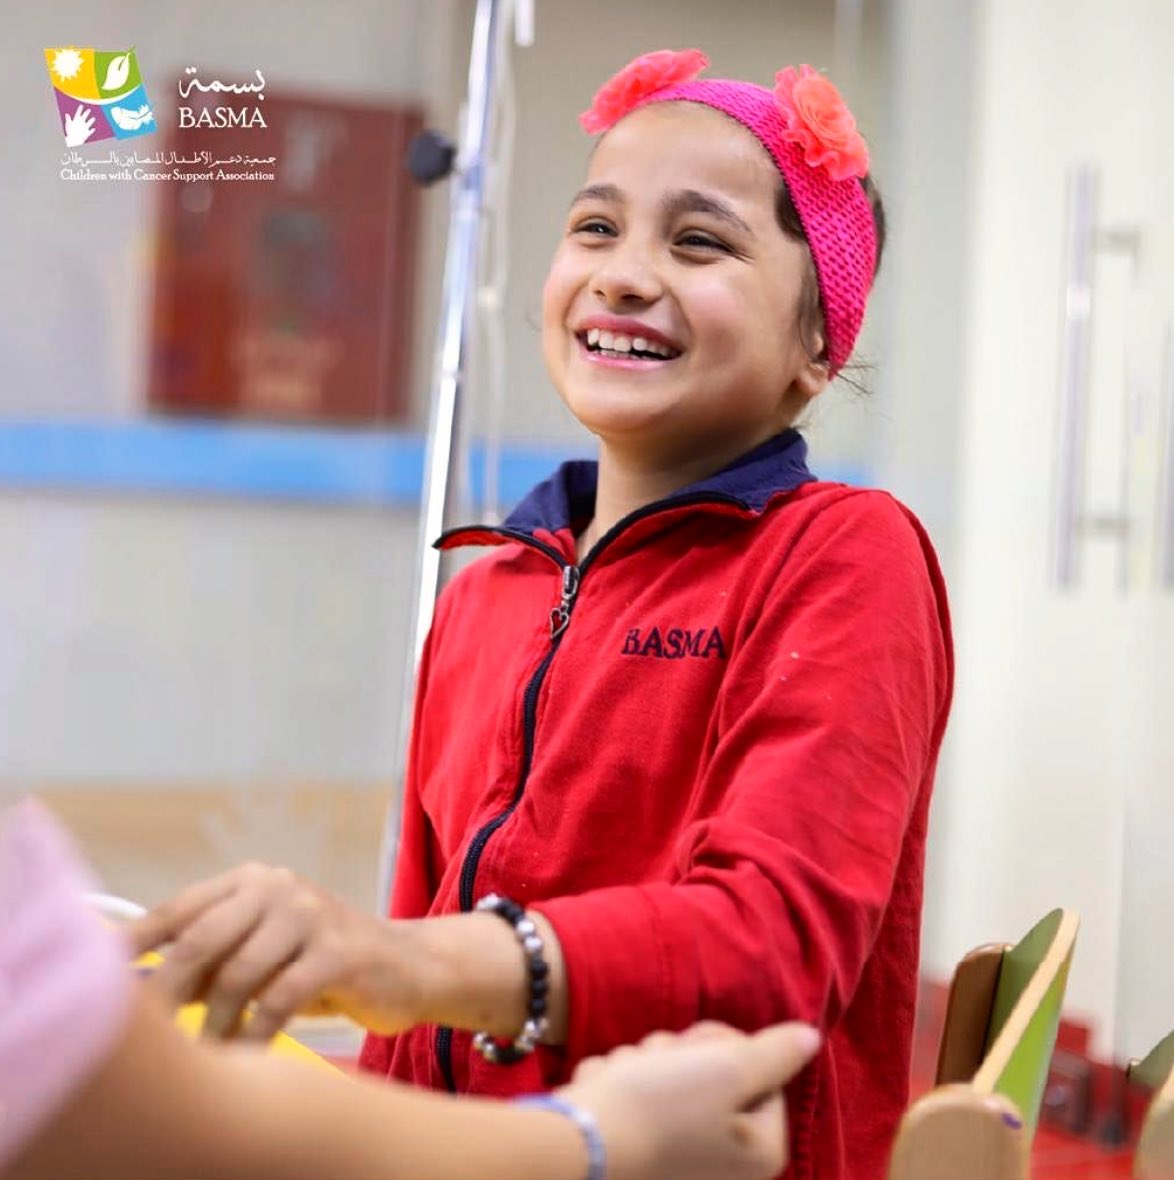 Khaled Ghanem: The indomitable power of our patients’ smiles triumphs over all stress.